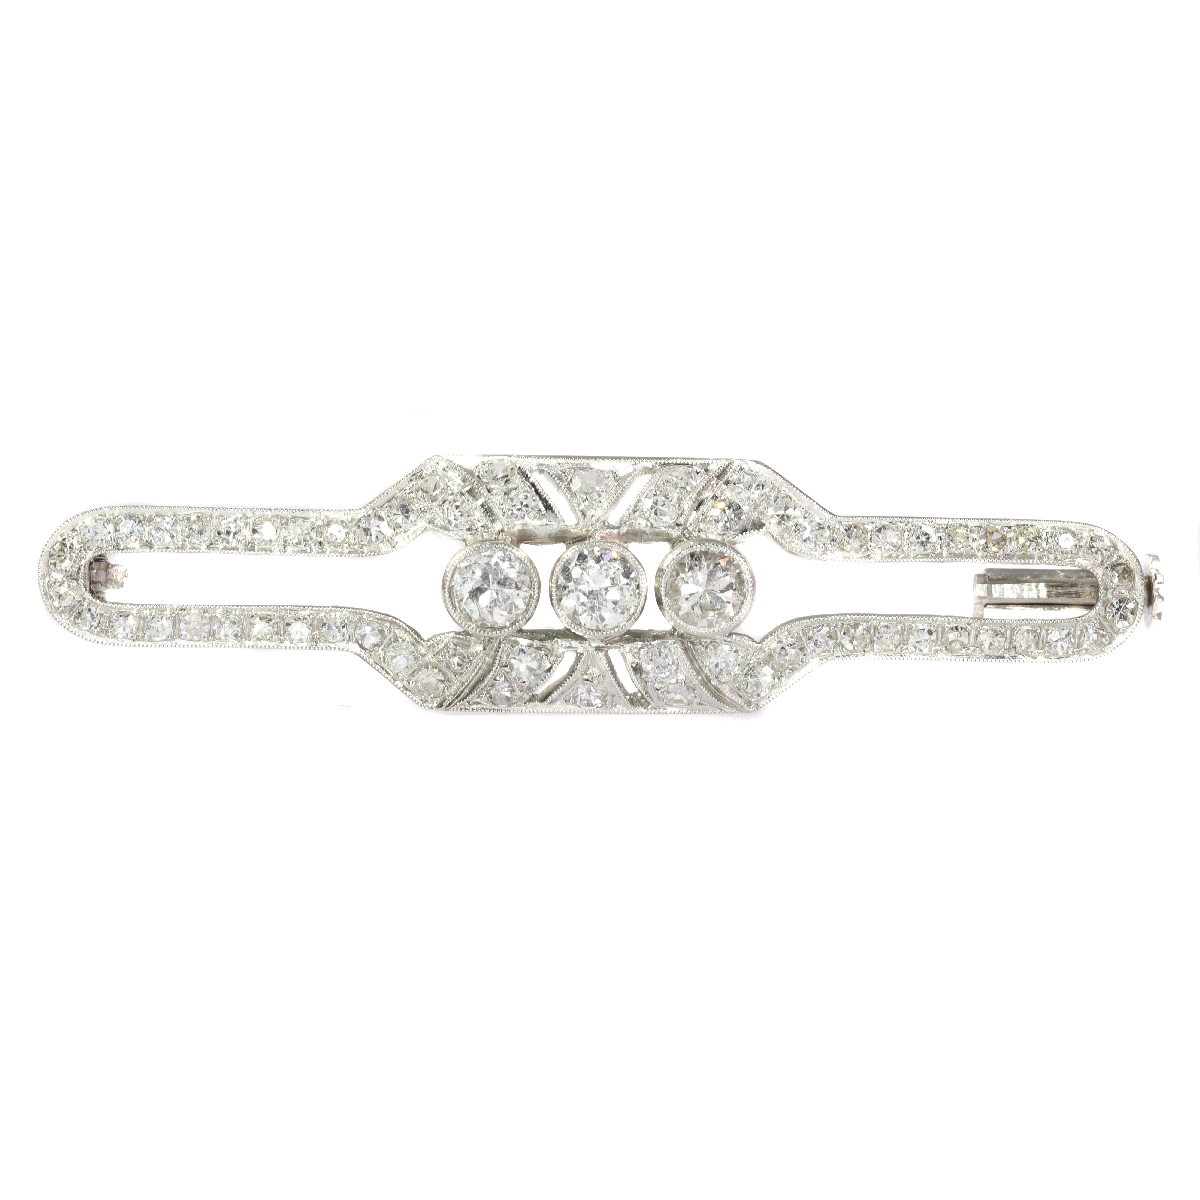 Wearing History: The Allure of the Art Deco Diamond Brooch